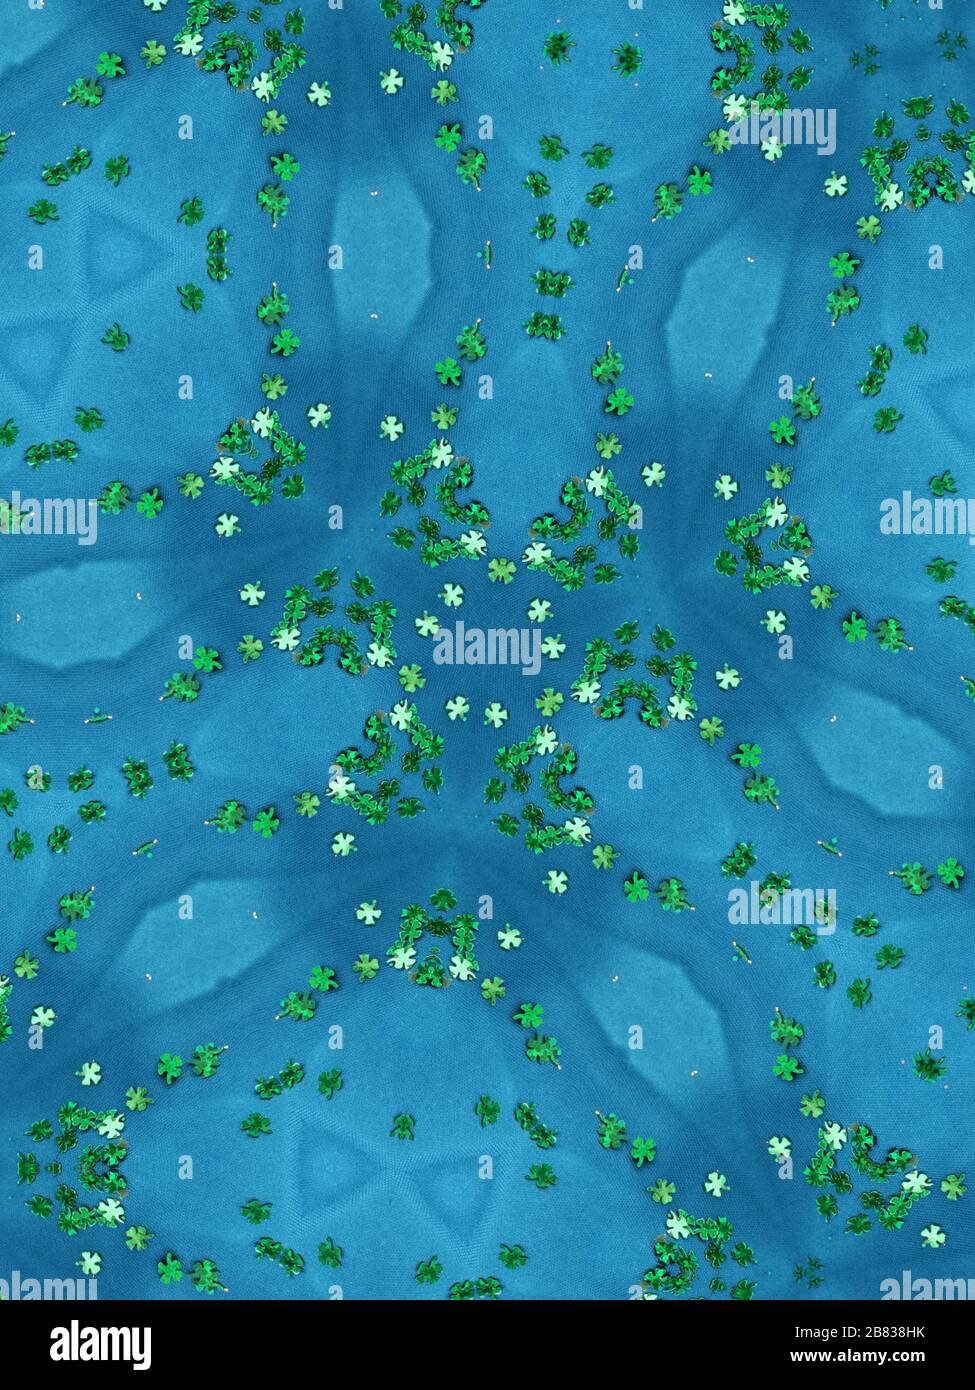 Reflective view of kaleidoscope of green clover confetti centre on sky blue background. Stock Photo